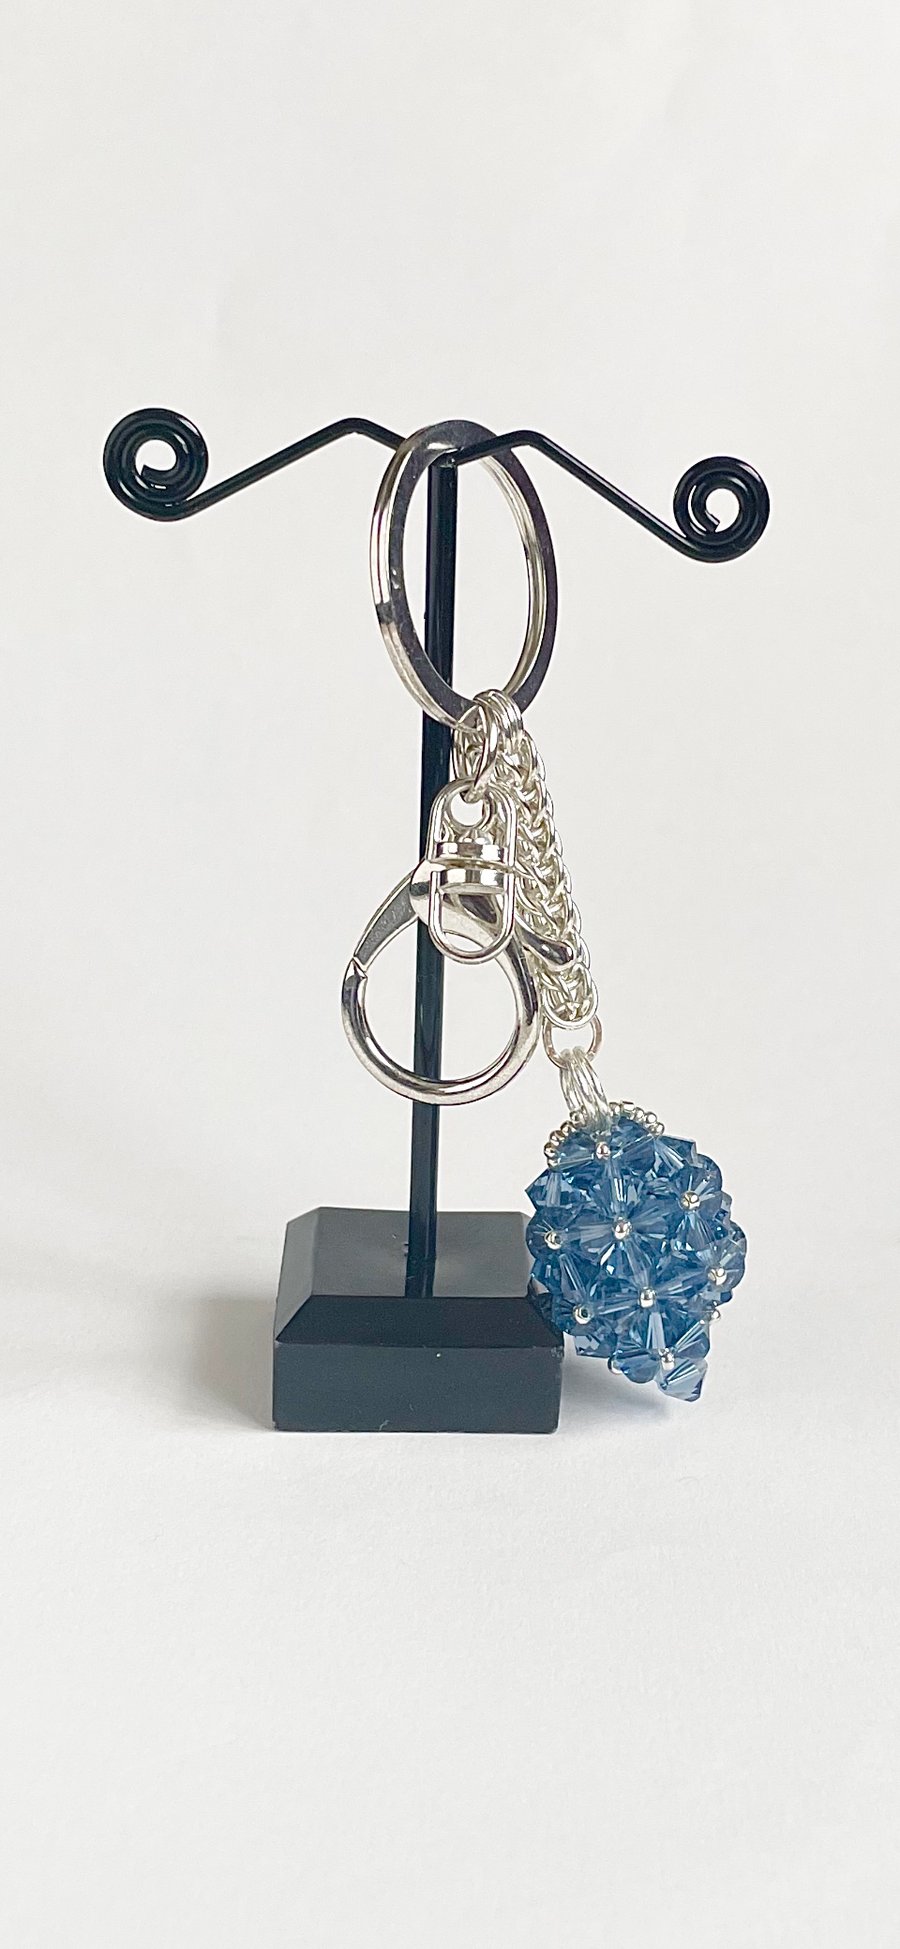 Handbag Charm, Egg Shaped Denim Blue Crystal with a Chainmaille Chain, Keyring